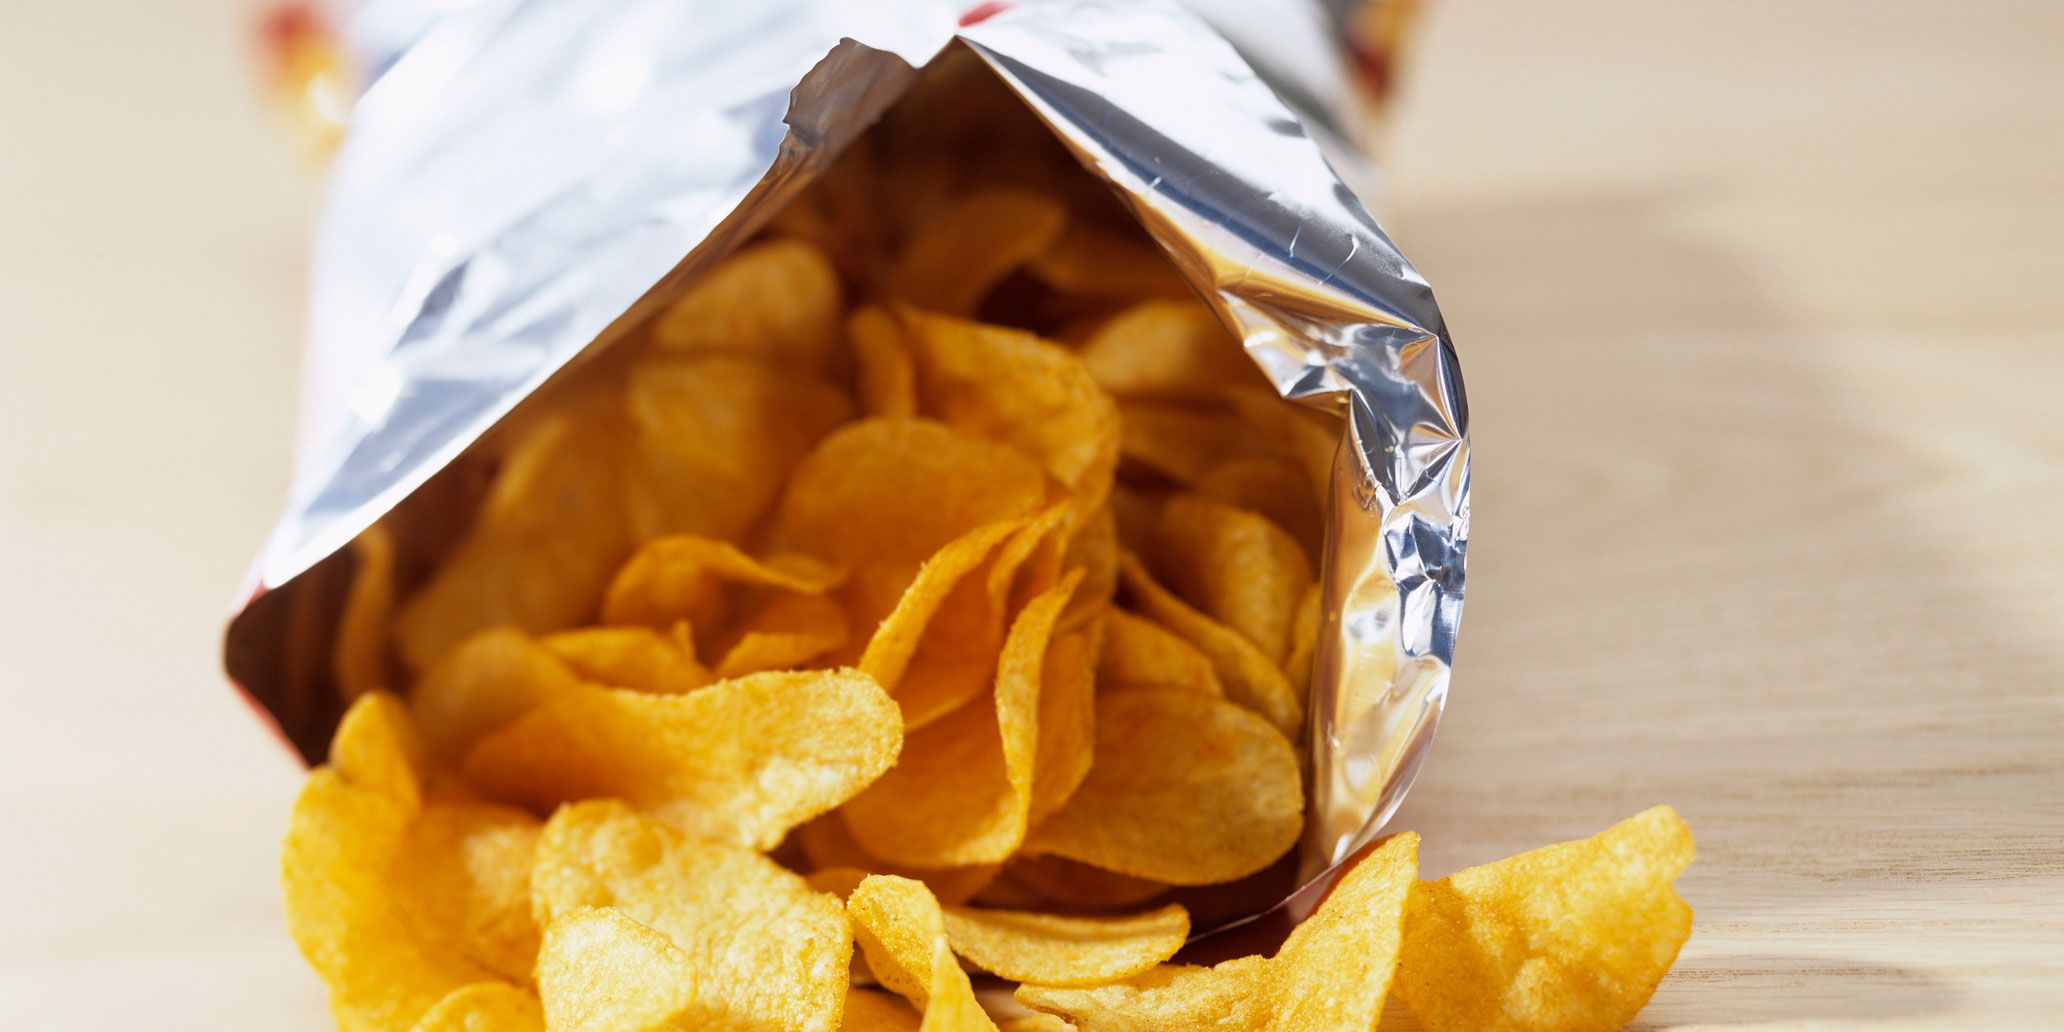 Crisp packets contain even more plastic than you thought, so sign